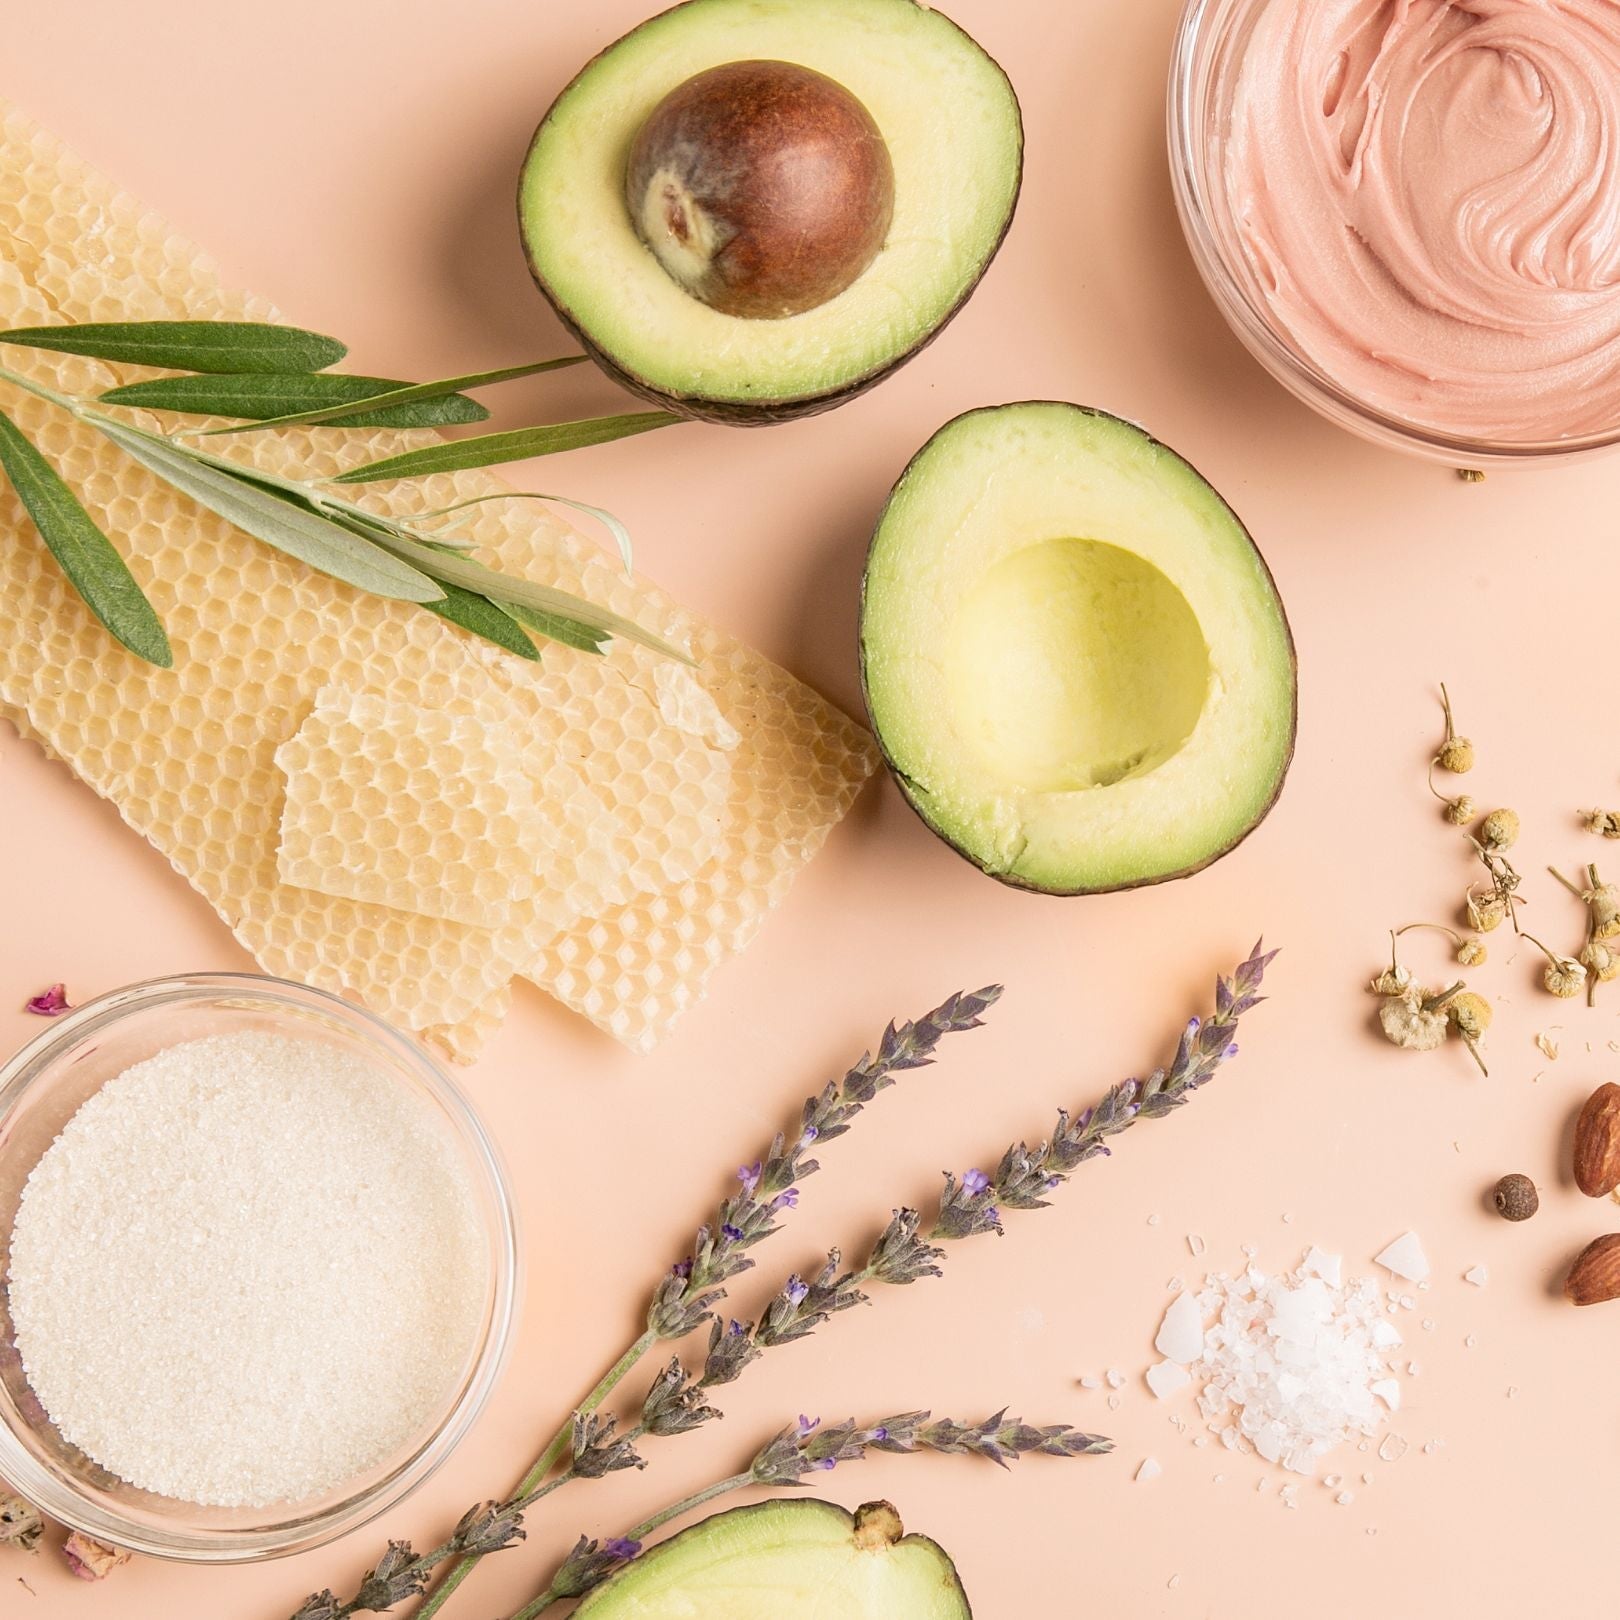 skin care ingredients including avocados, beeswax, and lavender on a pink background